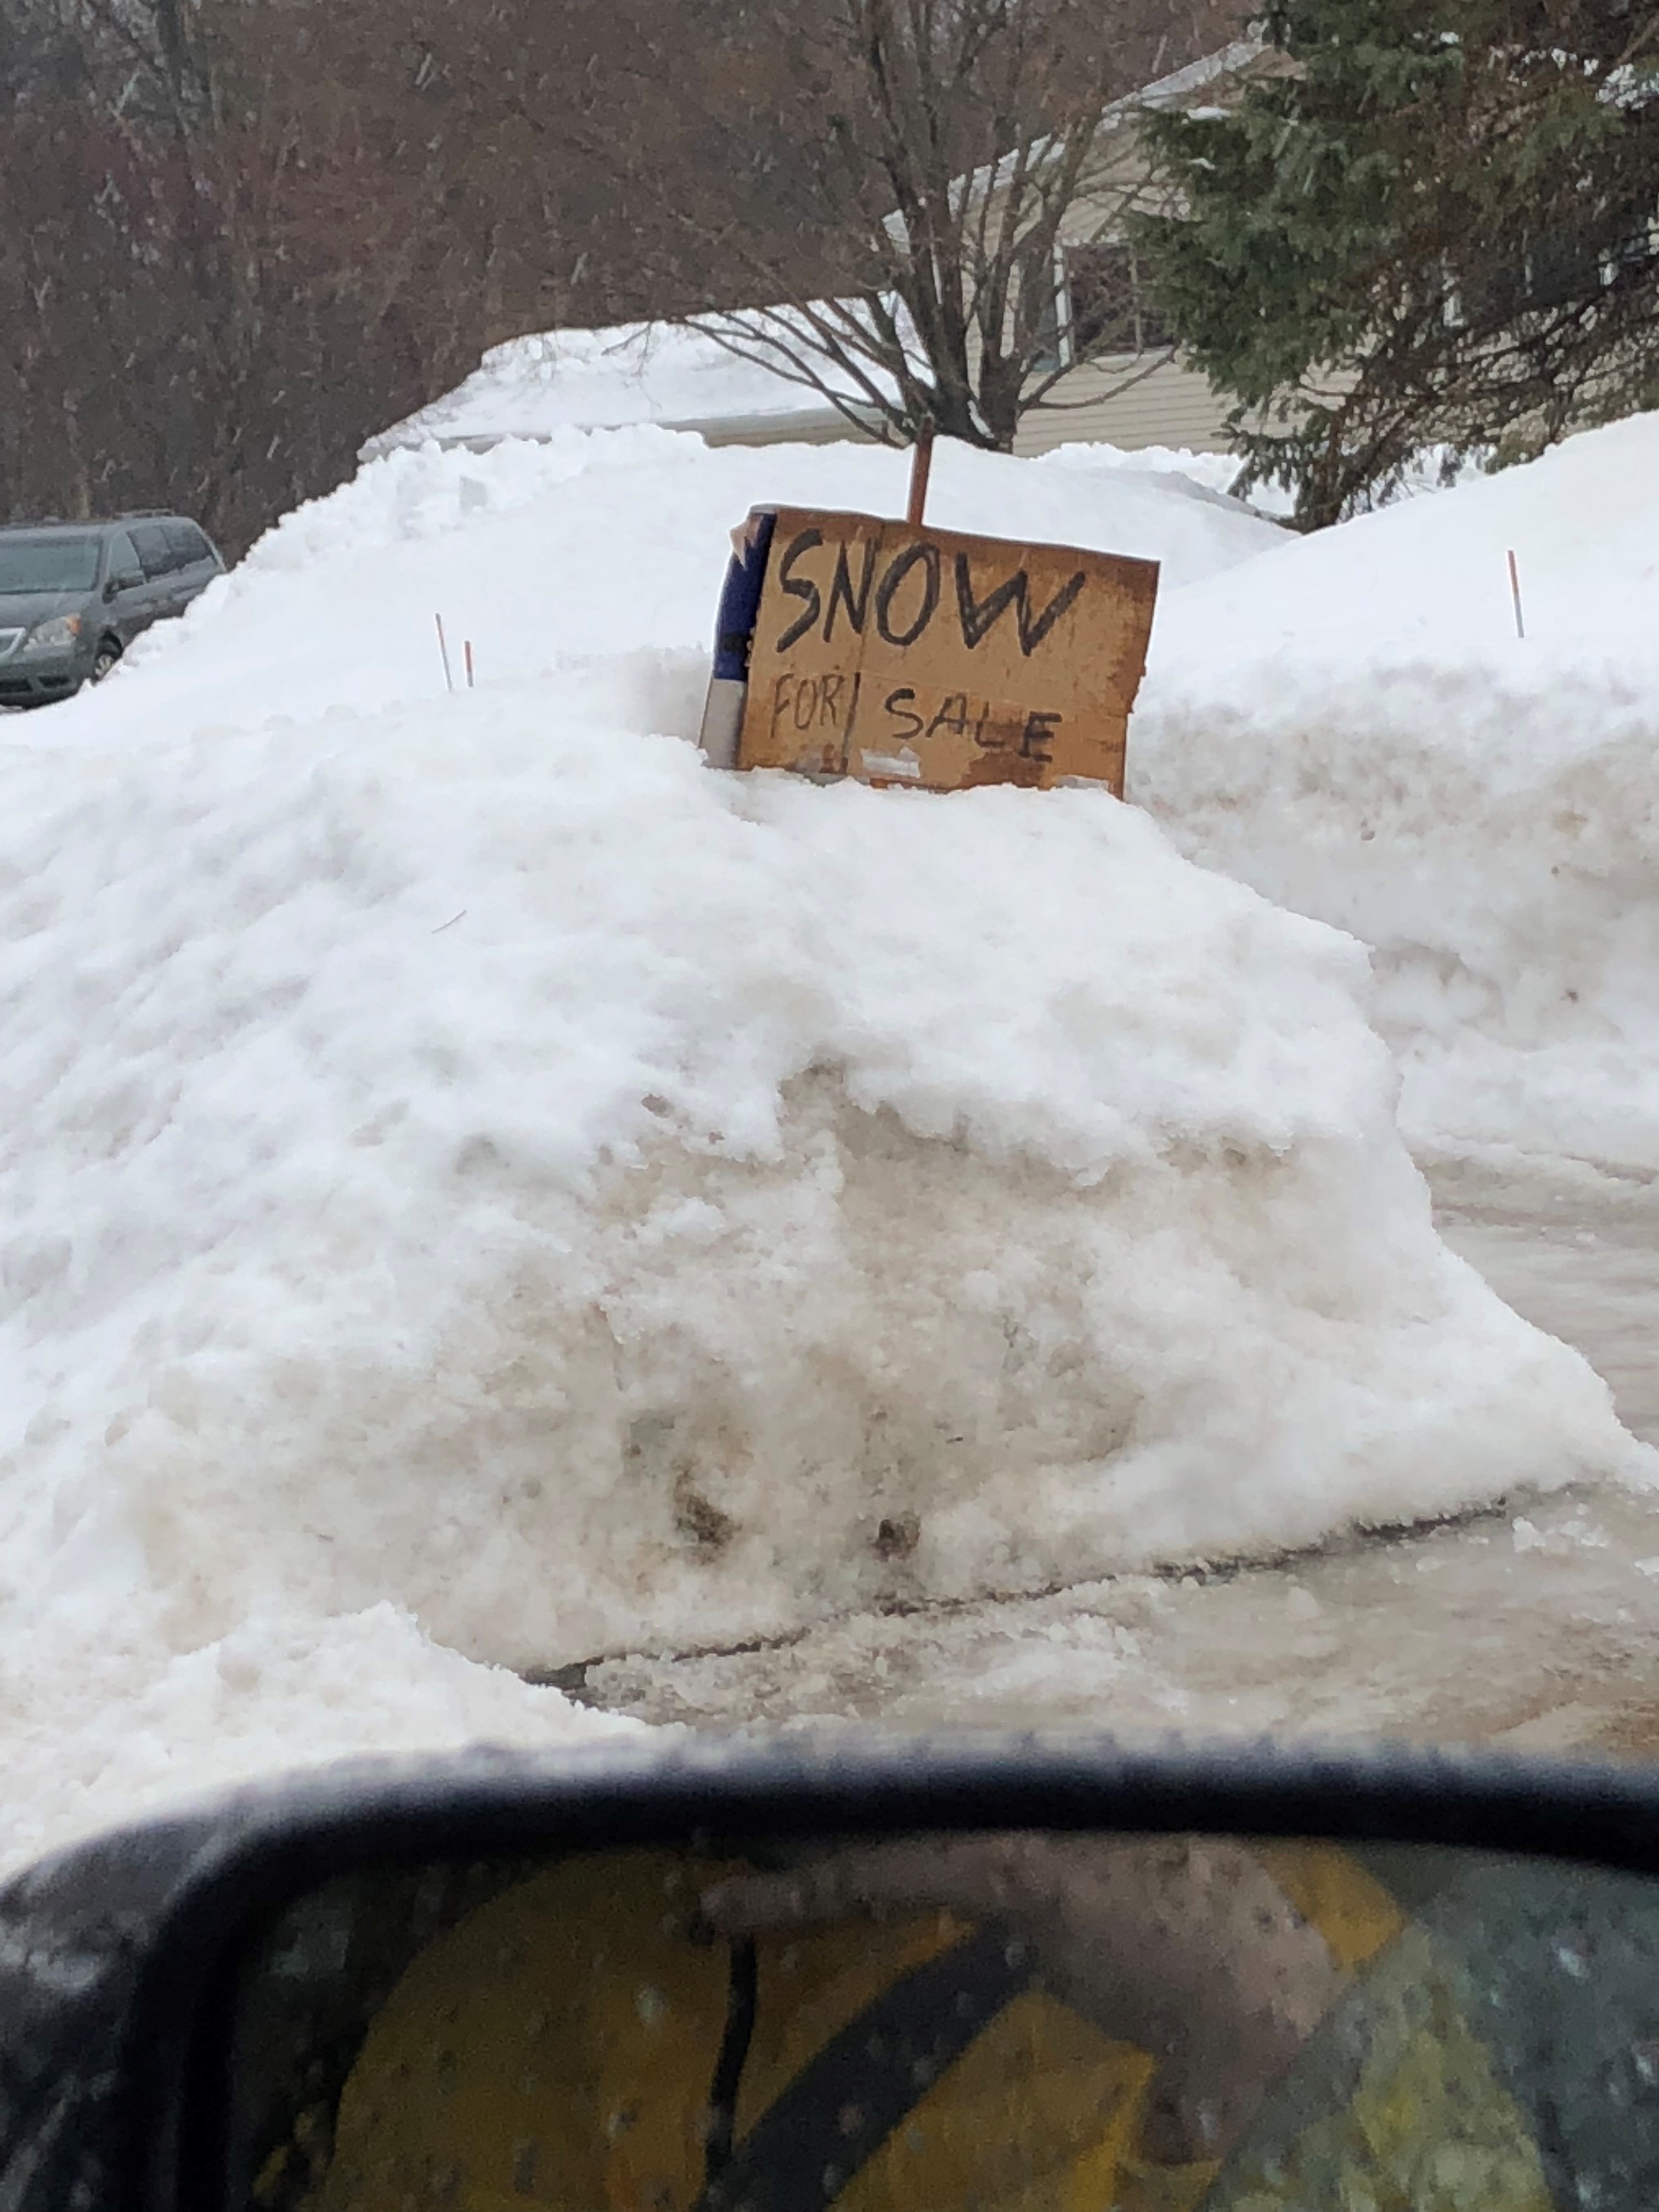 Just for Fun Snow for Sale sign